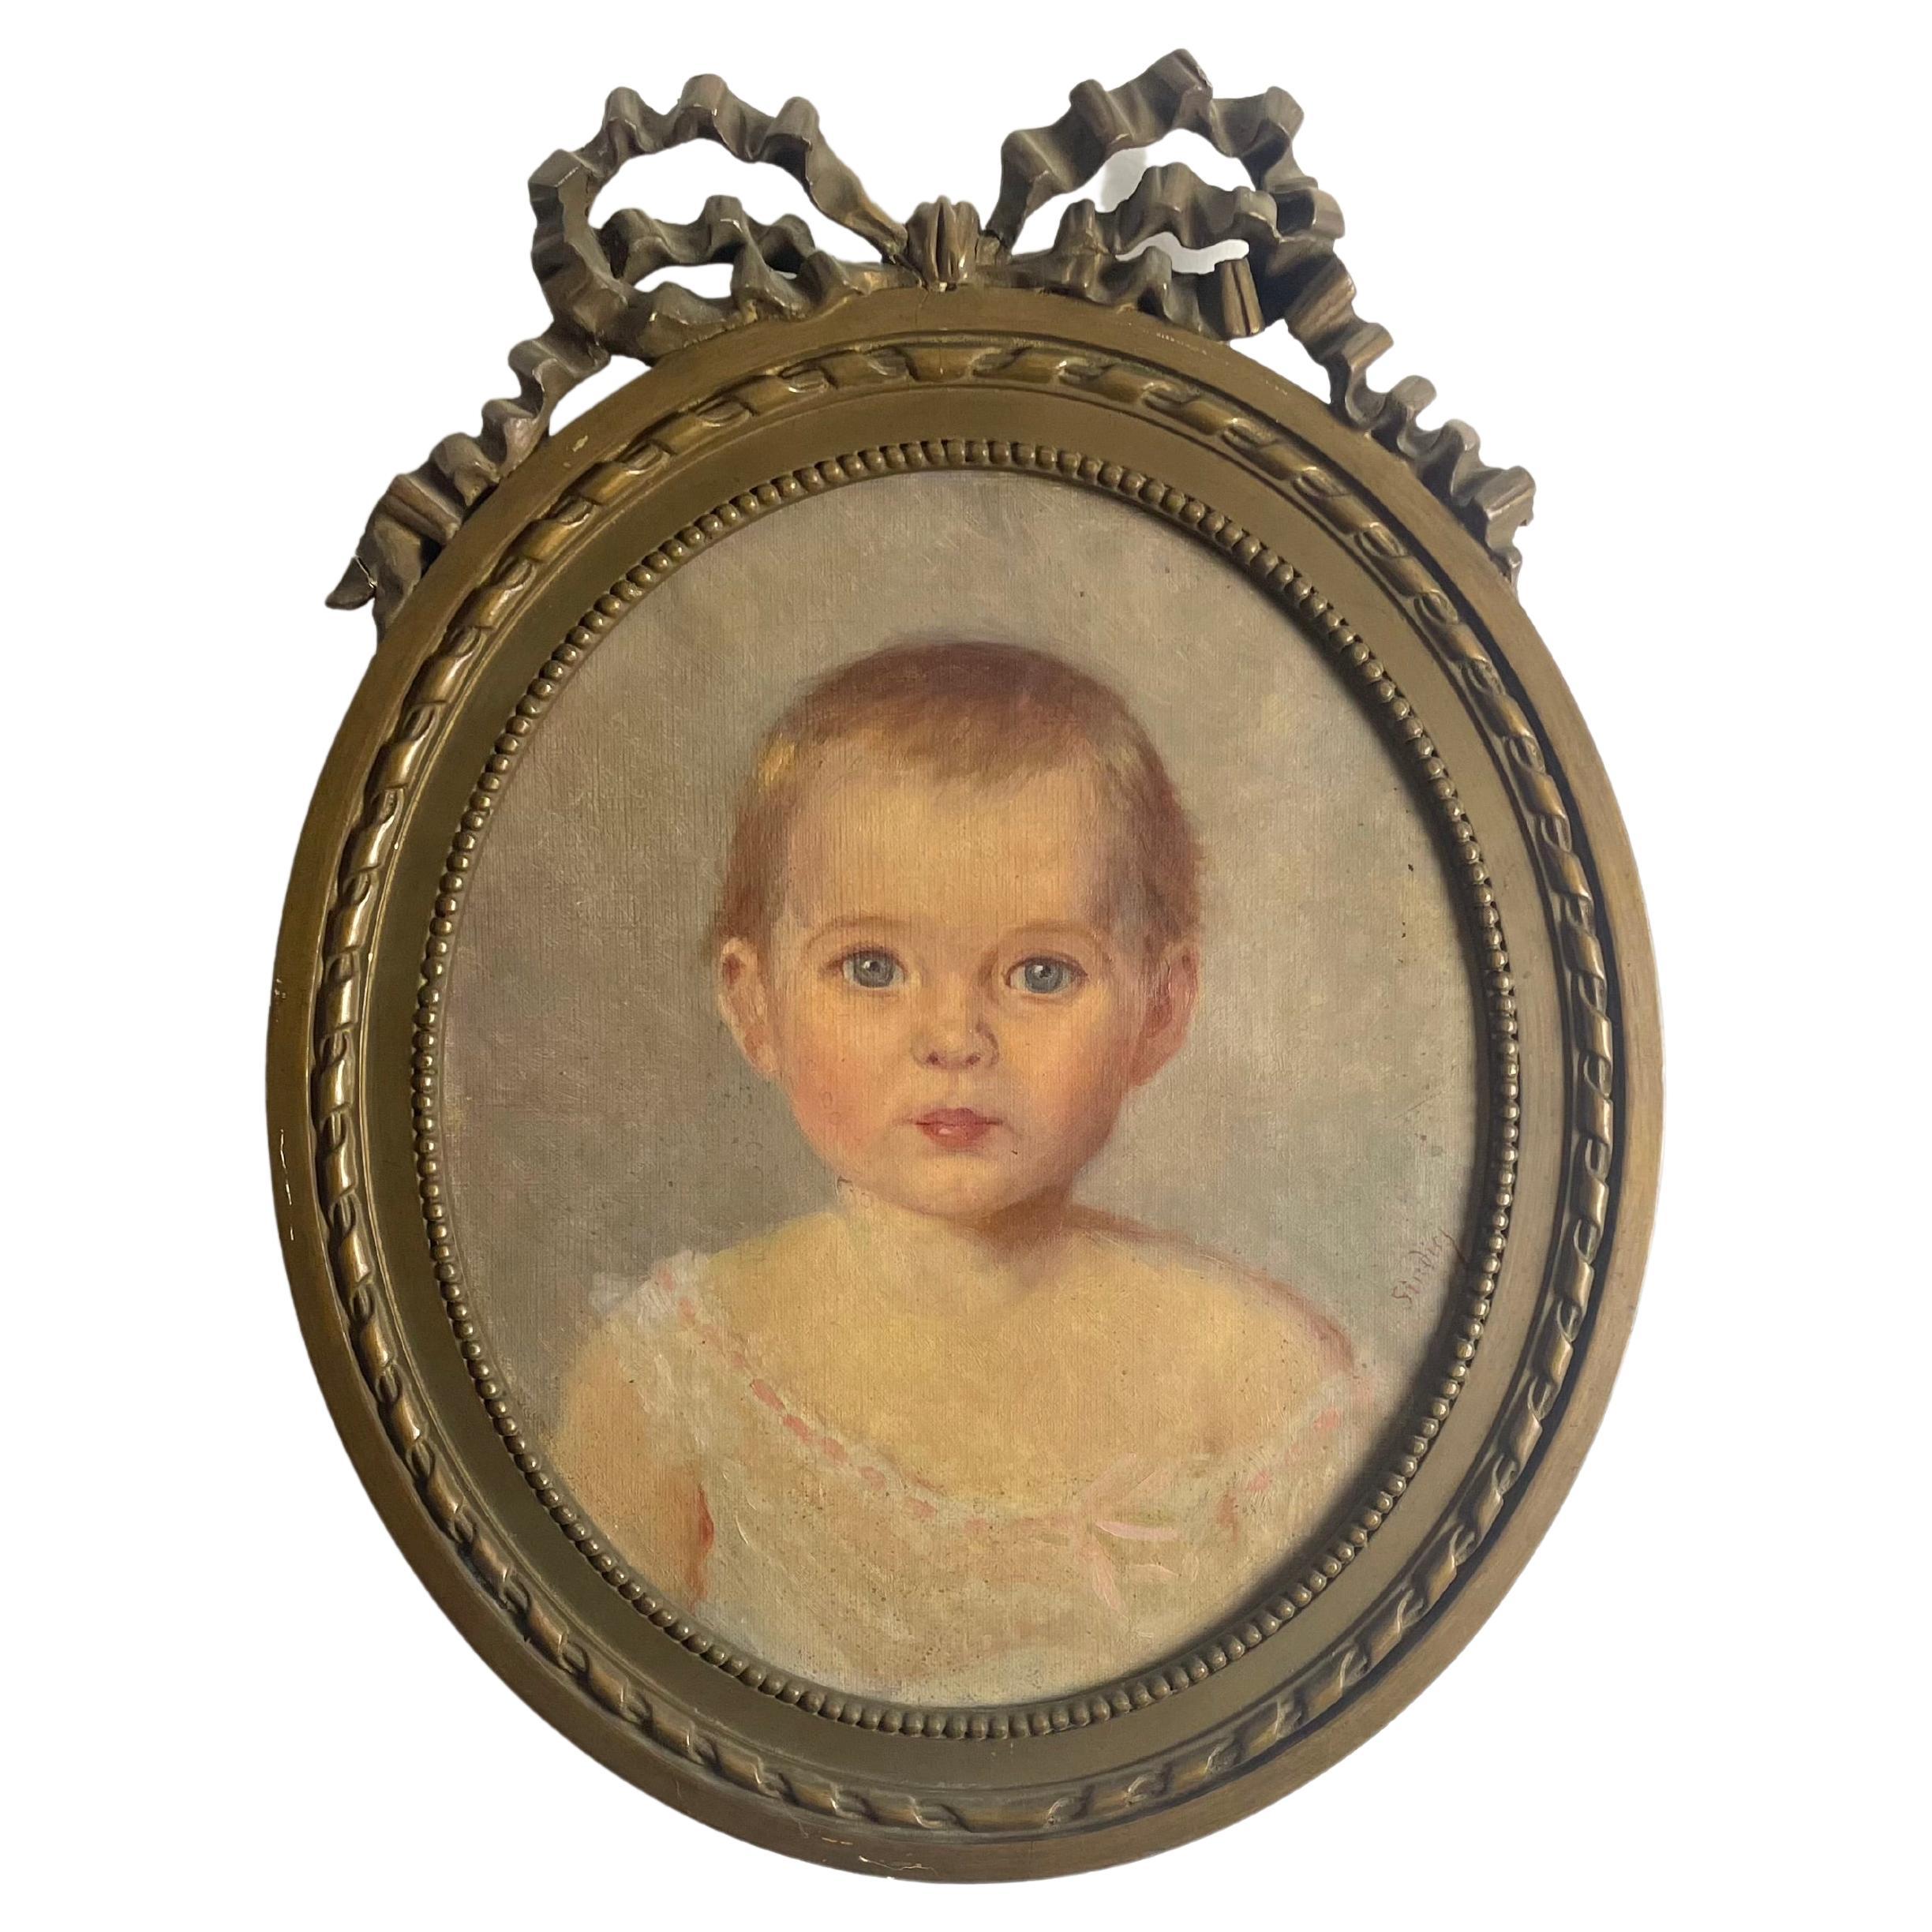 Portrait of baby / young child -Painting - Oil on canva - Framed - 19th France. 